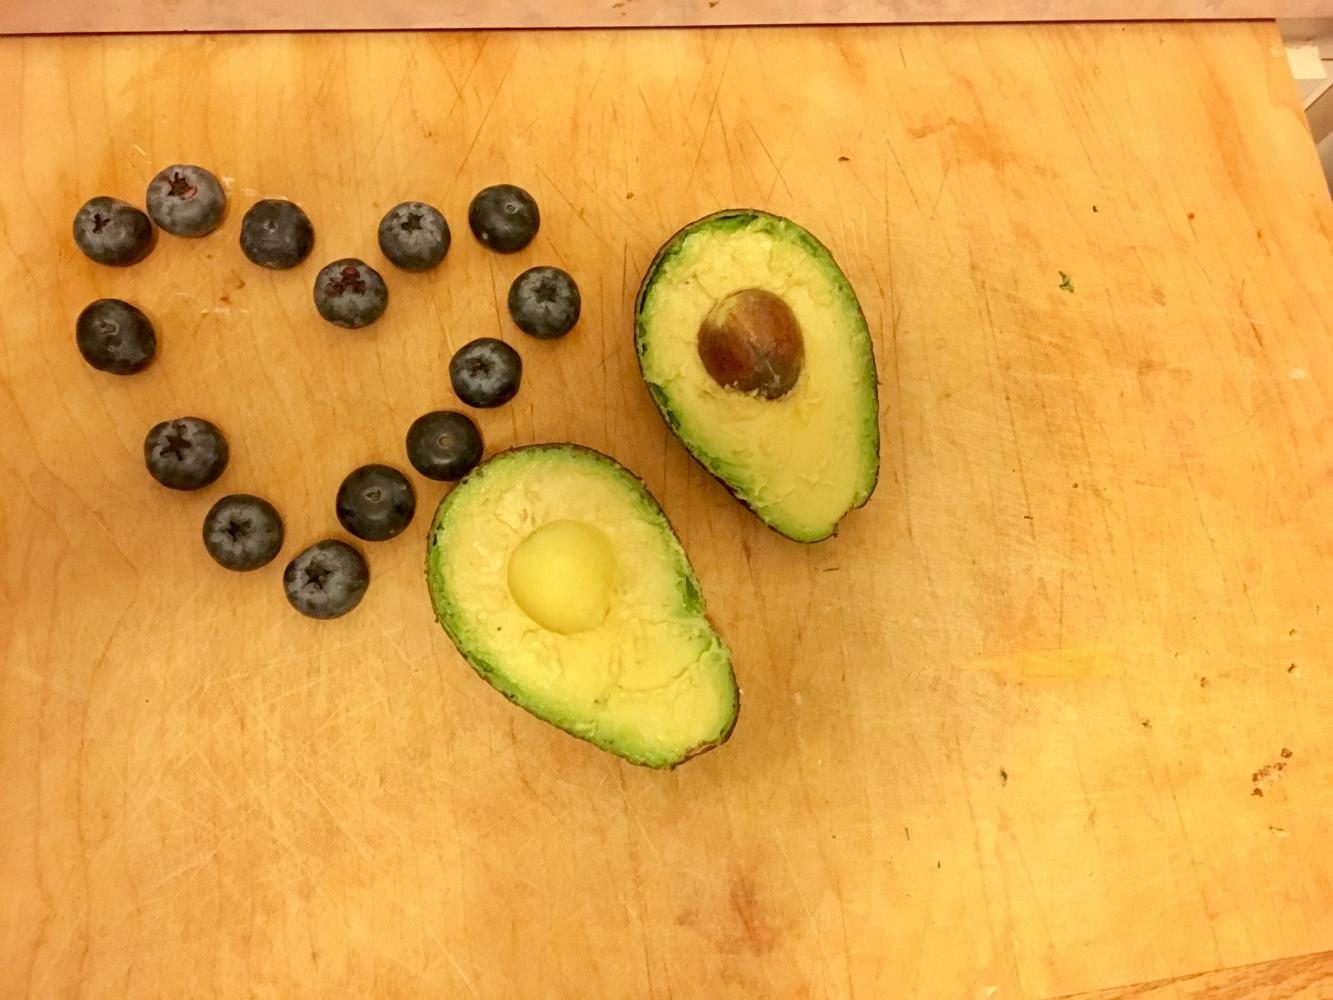 Avocados+and+blueberries+provide+nutritious+fuel+for+both+the+body+and+the+brain.++The+vitamins+in+these+fruits+reduce+inflammation+in+the+brain+caused+by+stress+and+otherwise+improve+cognitive+function.